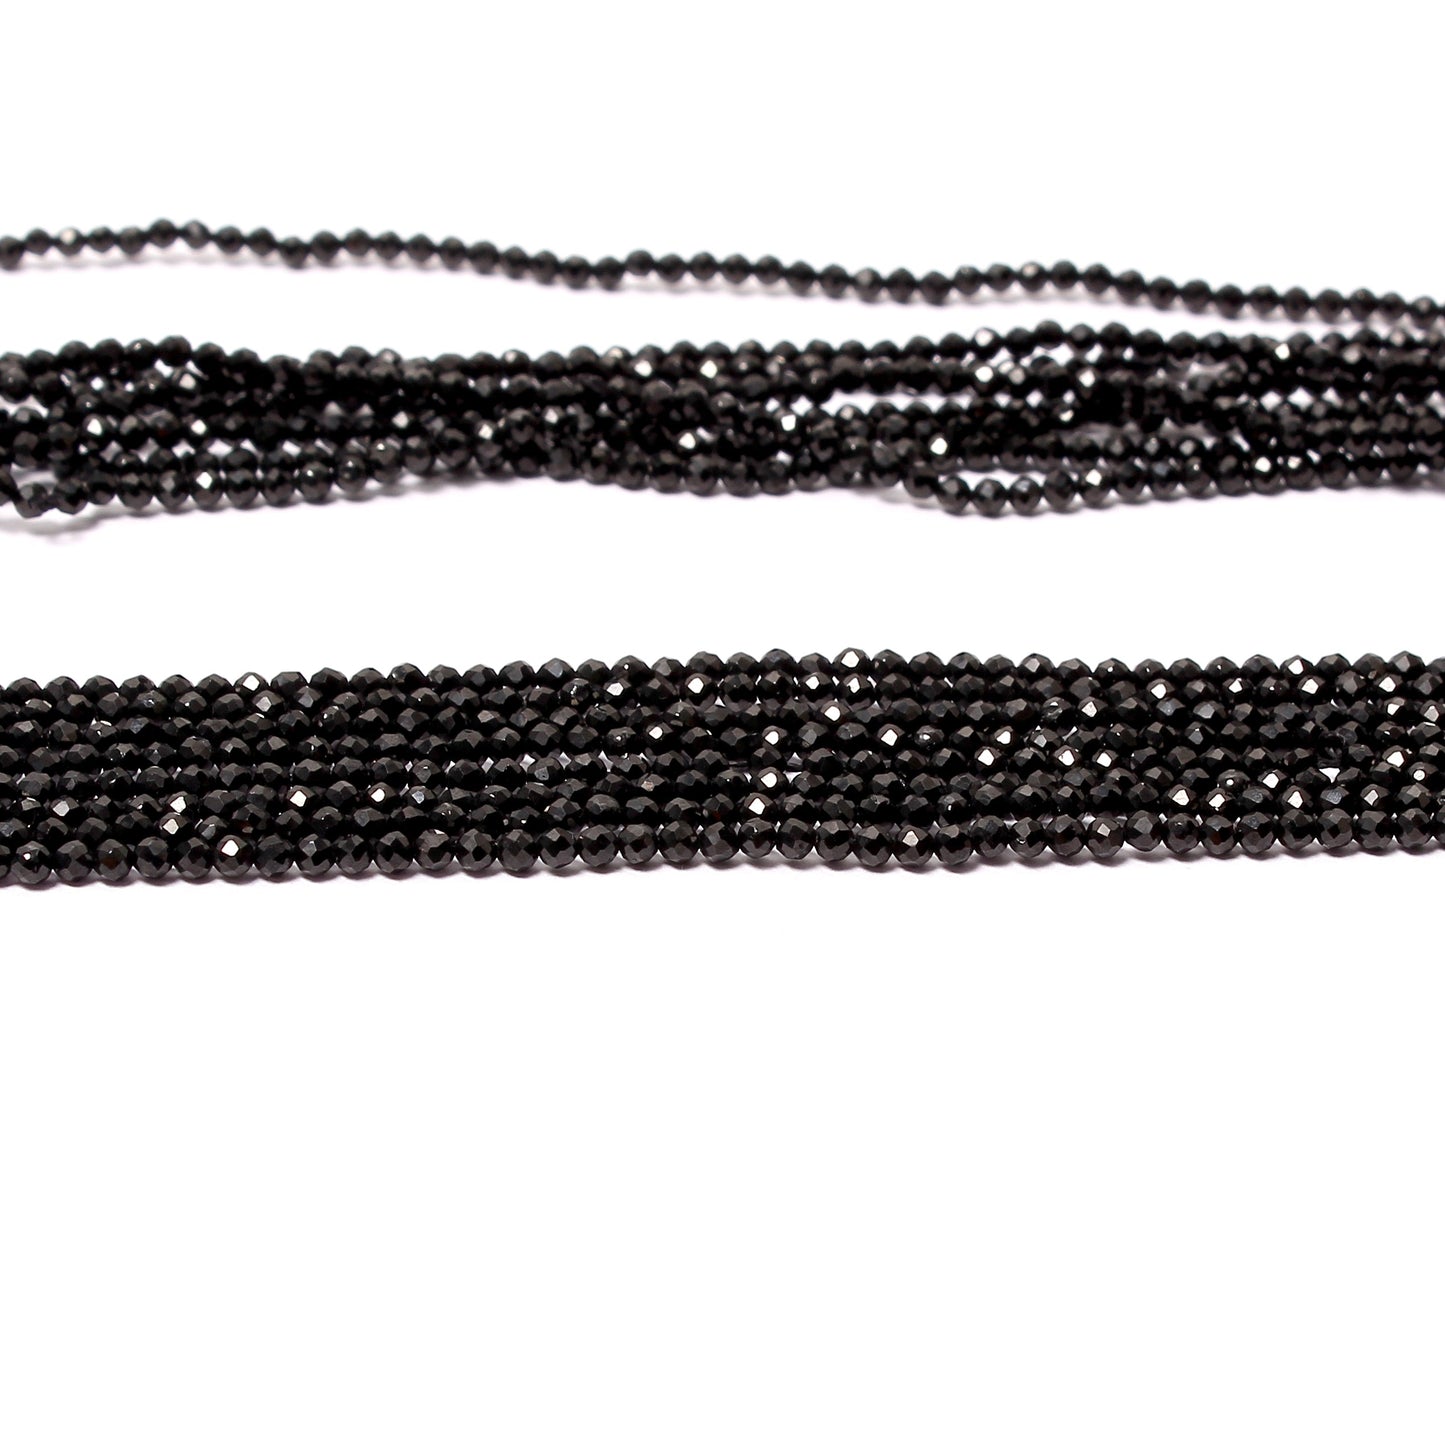 Black Spinel Faceted Beads Necklace, Black Spinel Round Beads Necklace, Multi Layering,Sparkling Black Beads Silver Necklace GemsRush